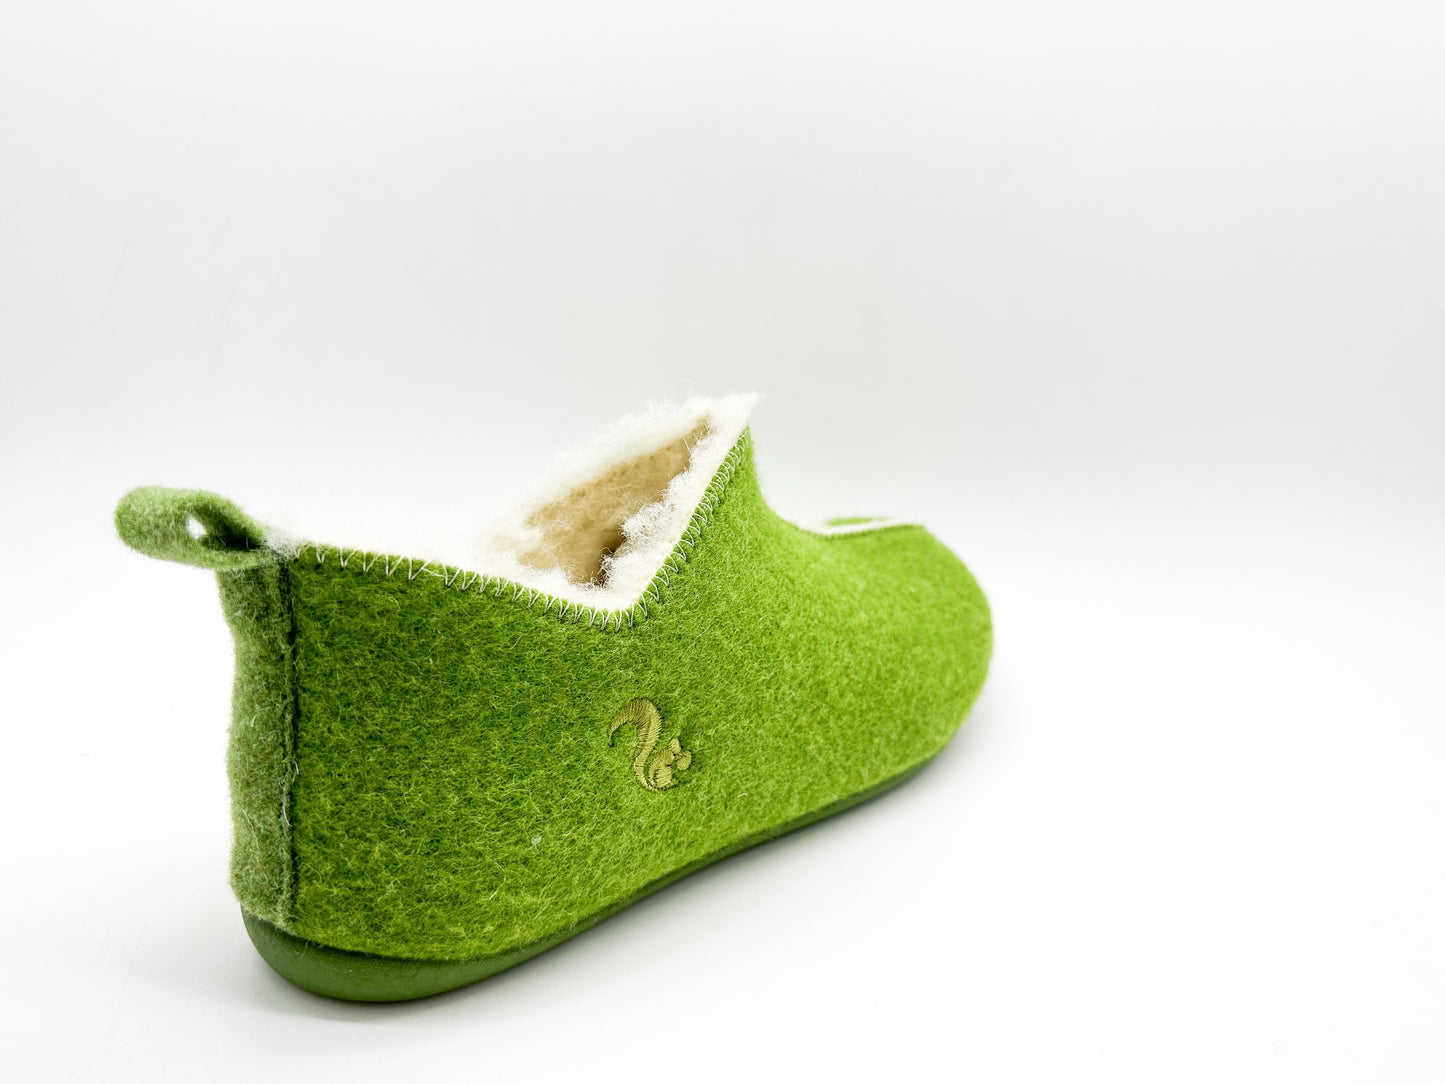 thies 1856 ® Slipper Boots light green with Eco Wool (W)